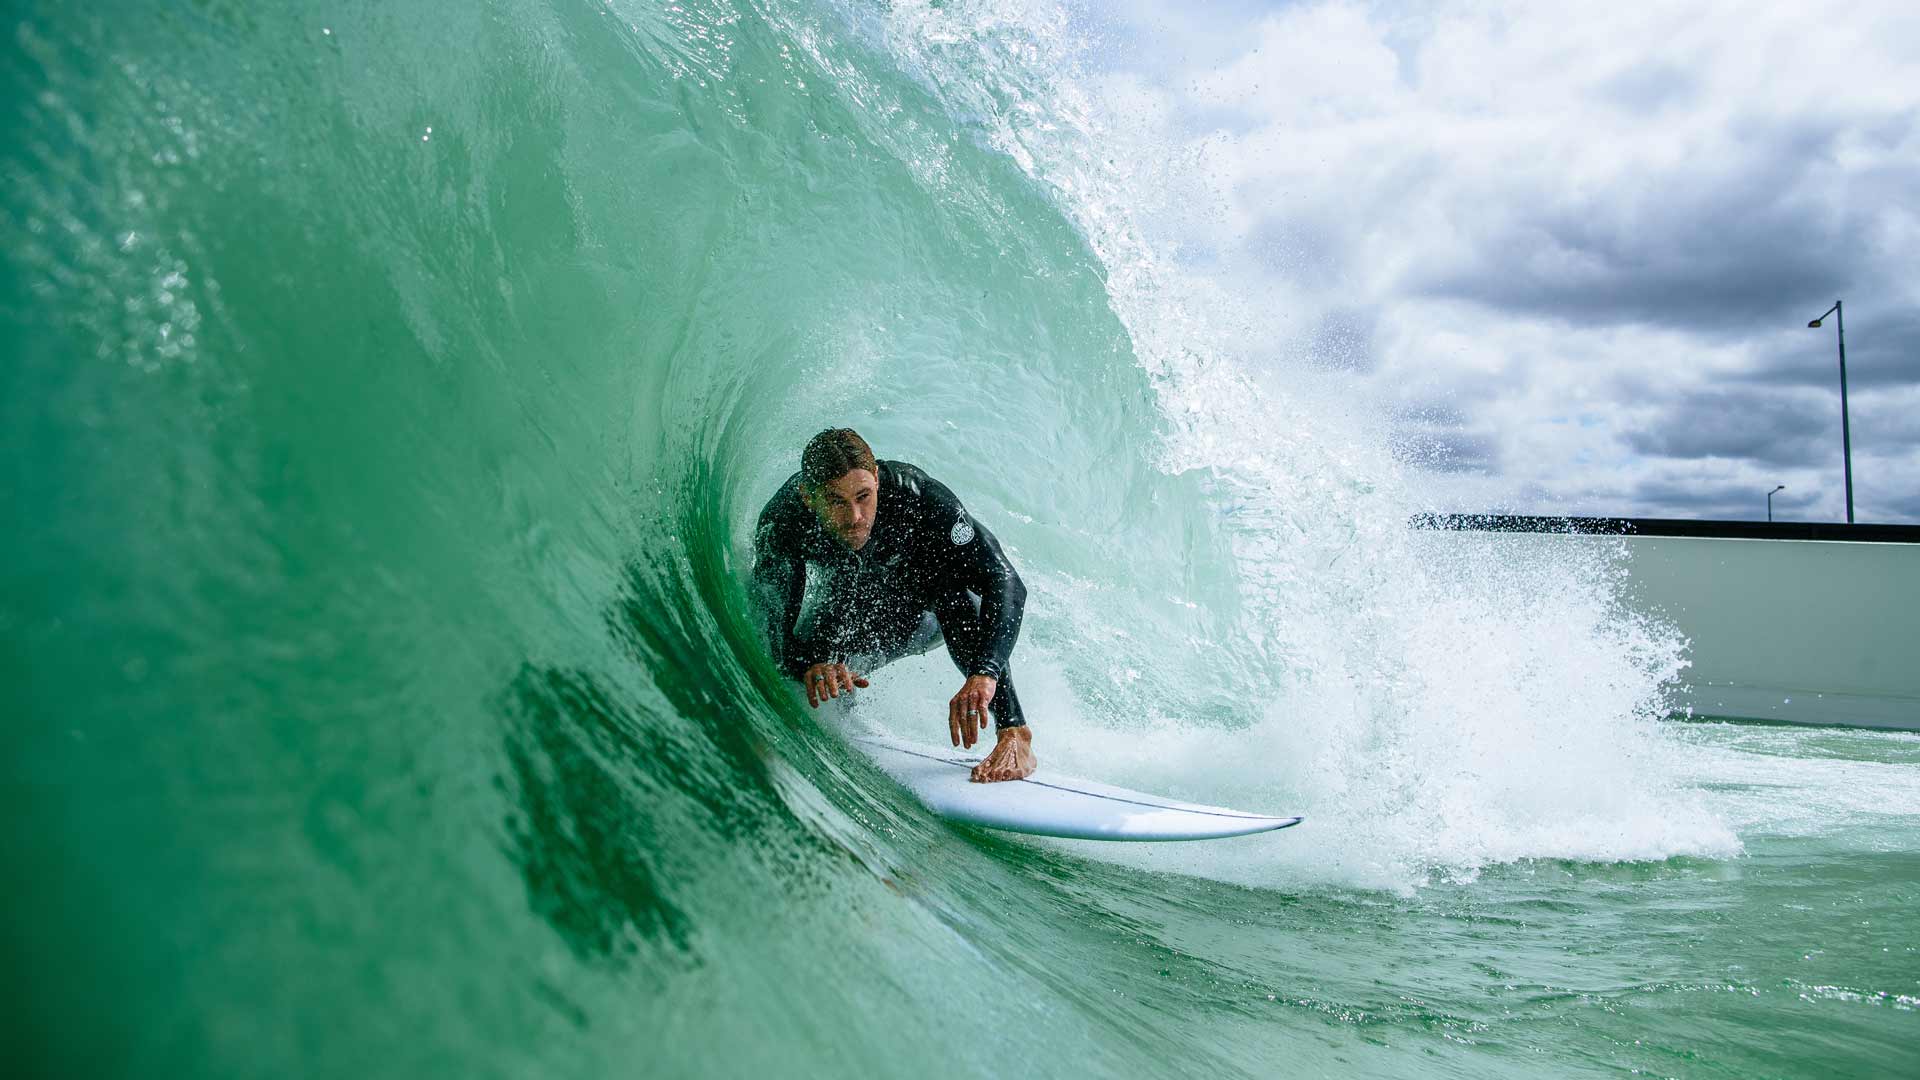 Melbourne's Surf Park Urbnsurf Will Start Pumping Out Waves Again From Next Week